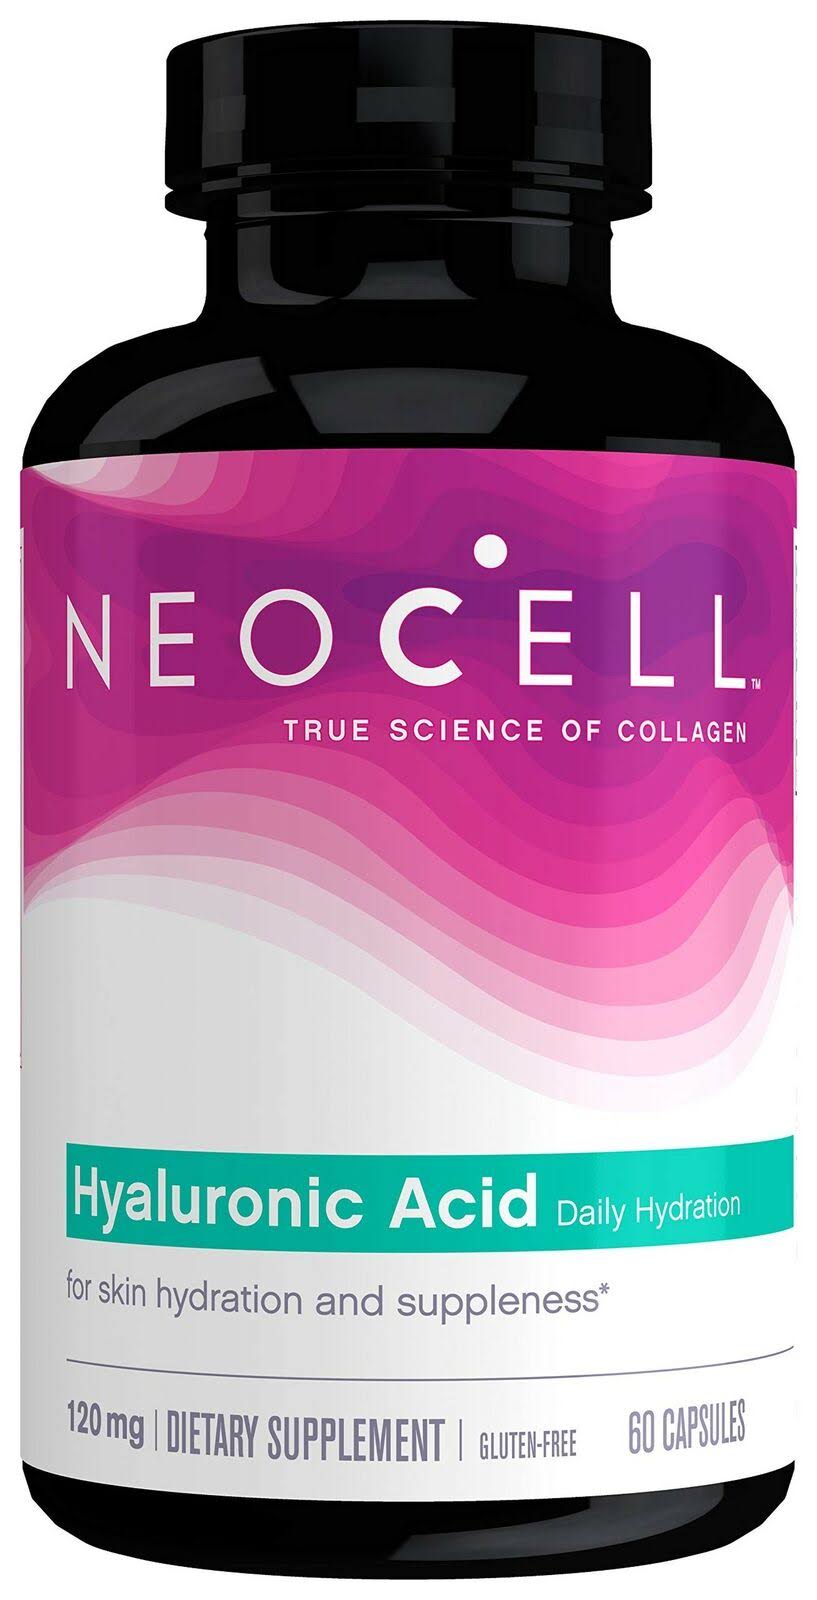 NeoCell Hyaluronic Acid Double Strength - 120mg, 60 ct